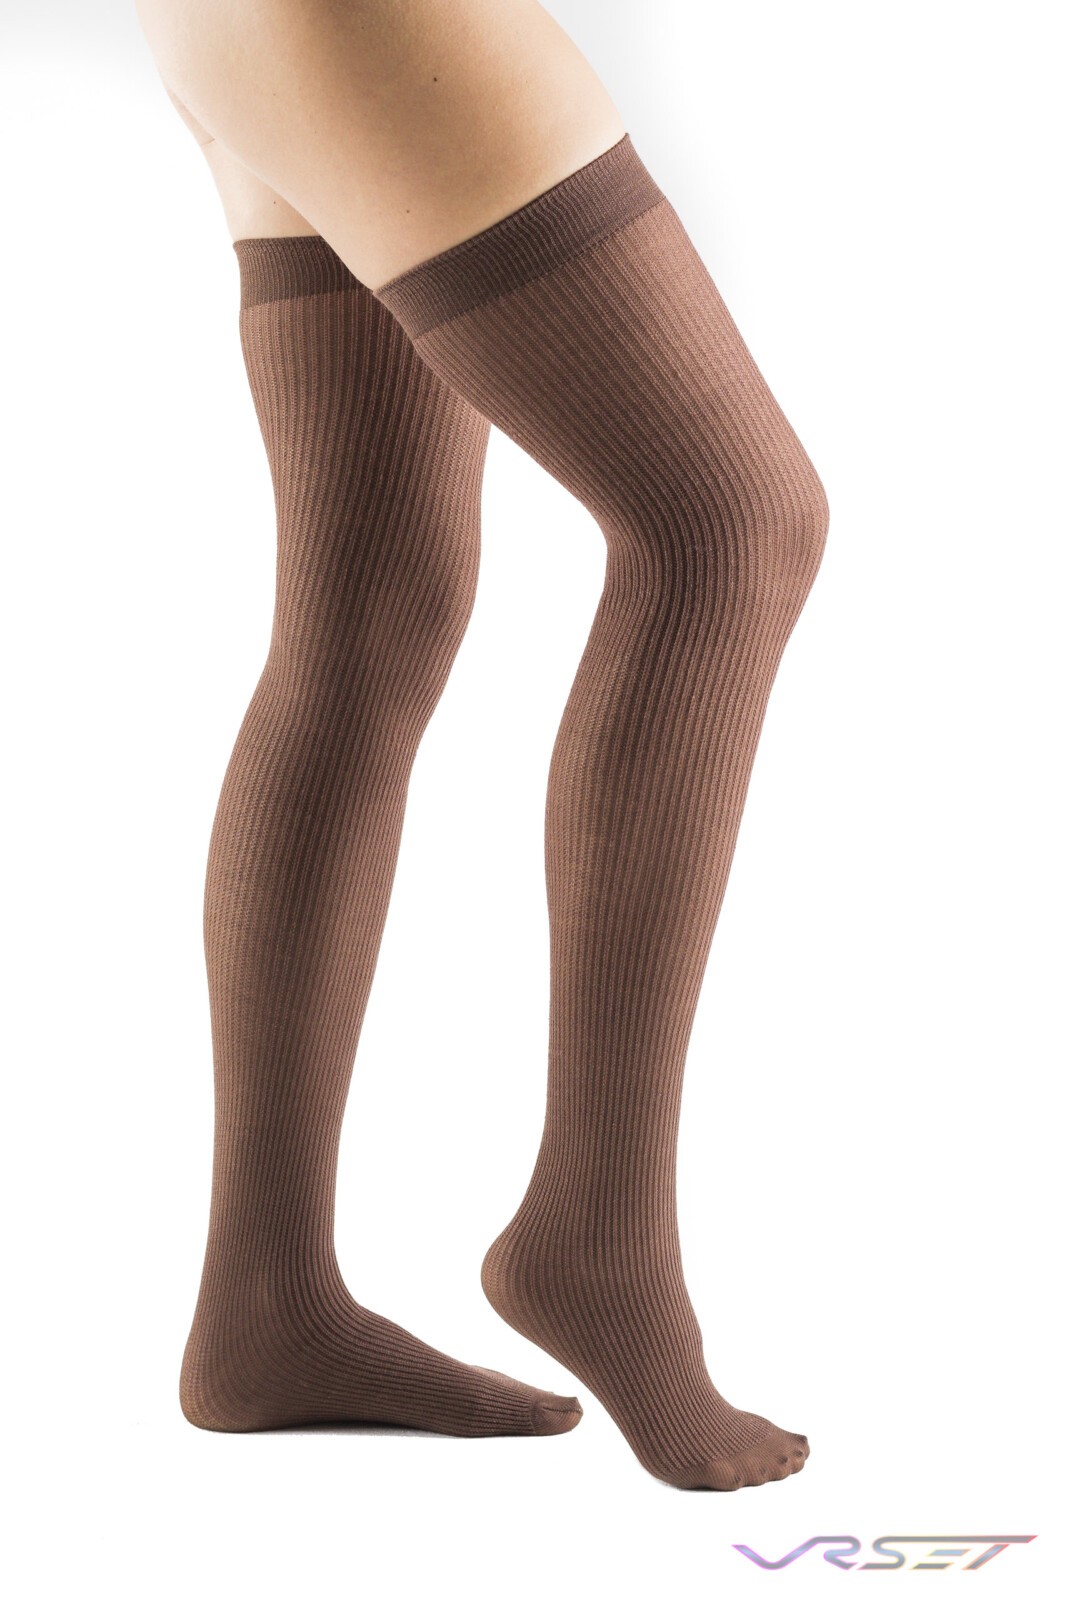 eCommerce Studio Womens Over Knee Socks Brown Top Fashion Photographer Los Angeles Orange County Video Production David Victory